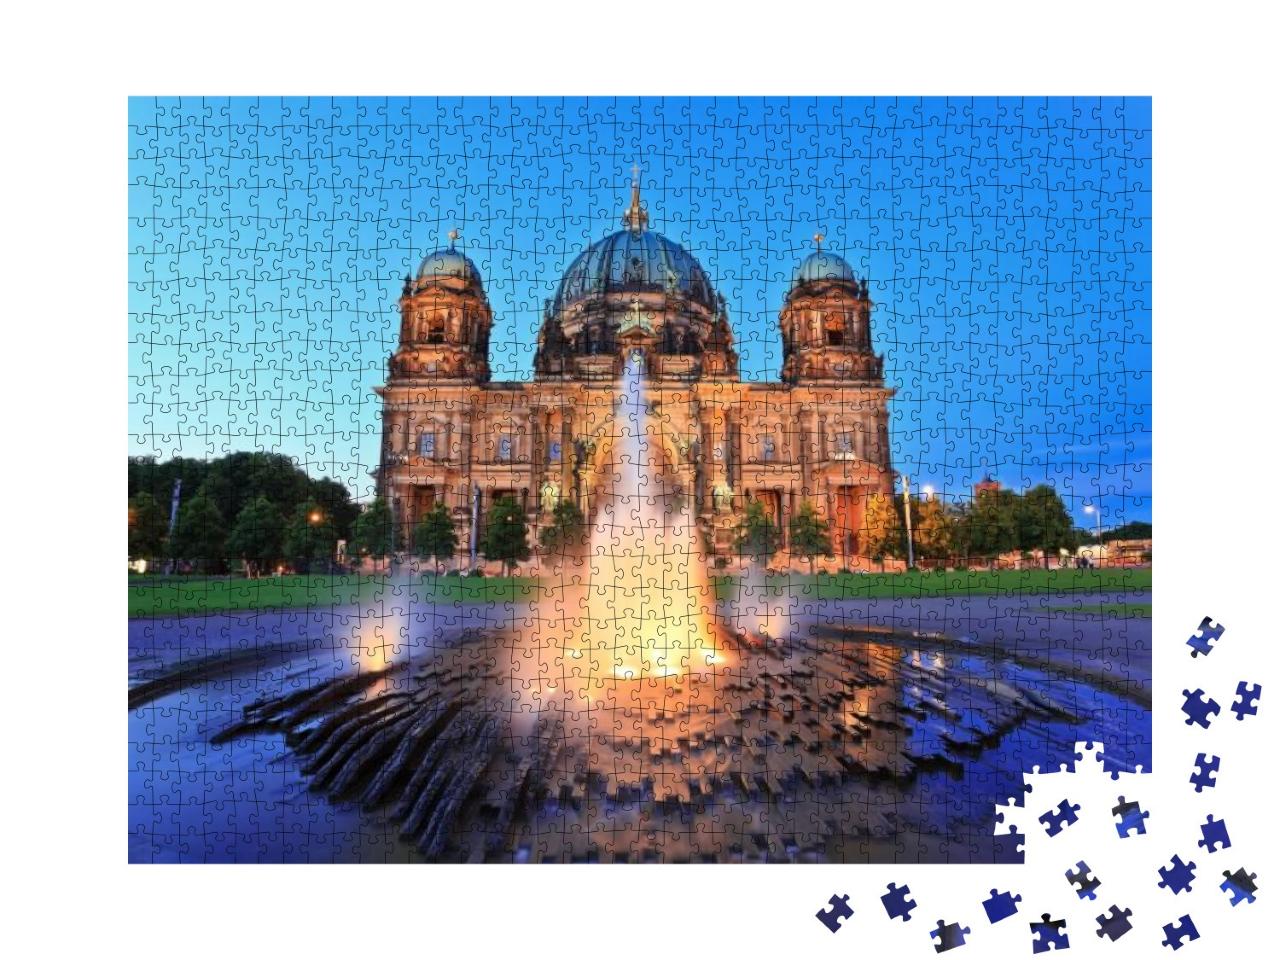 Puzzle 1000 Teile „Berliner Kathedrale bei Nacht“